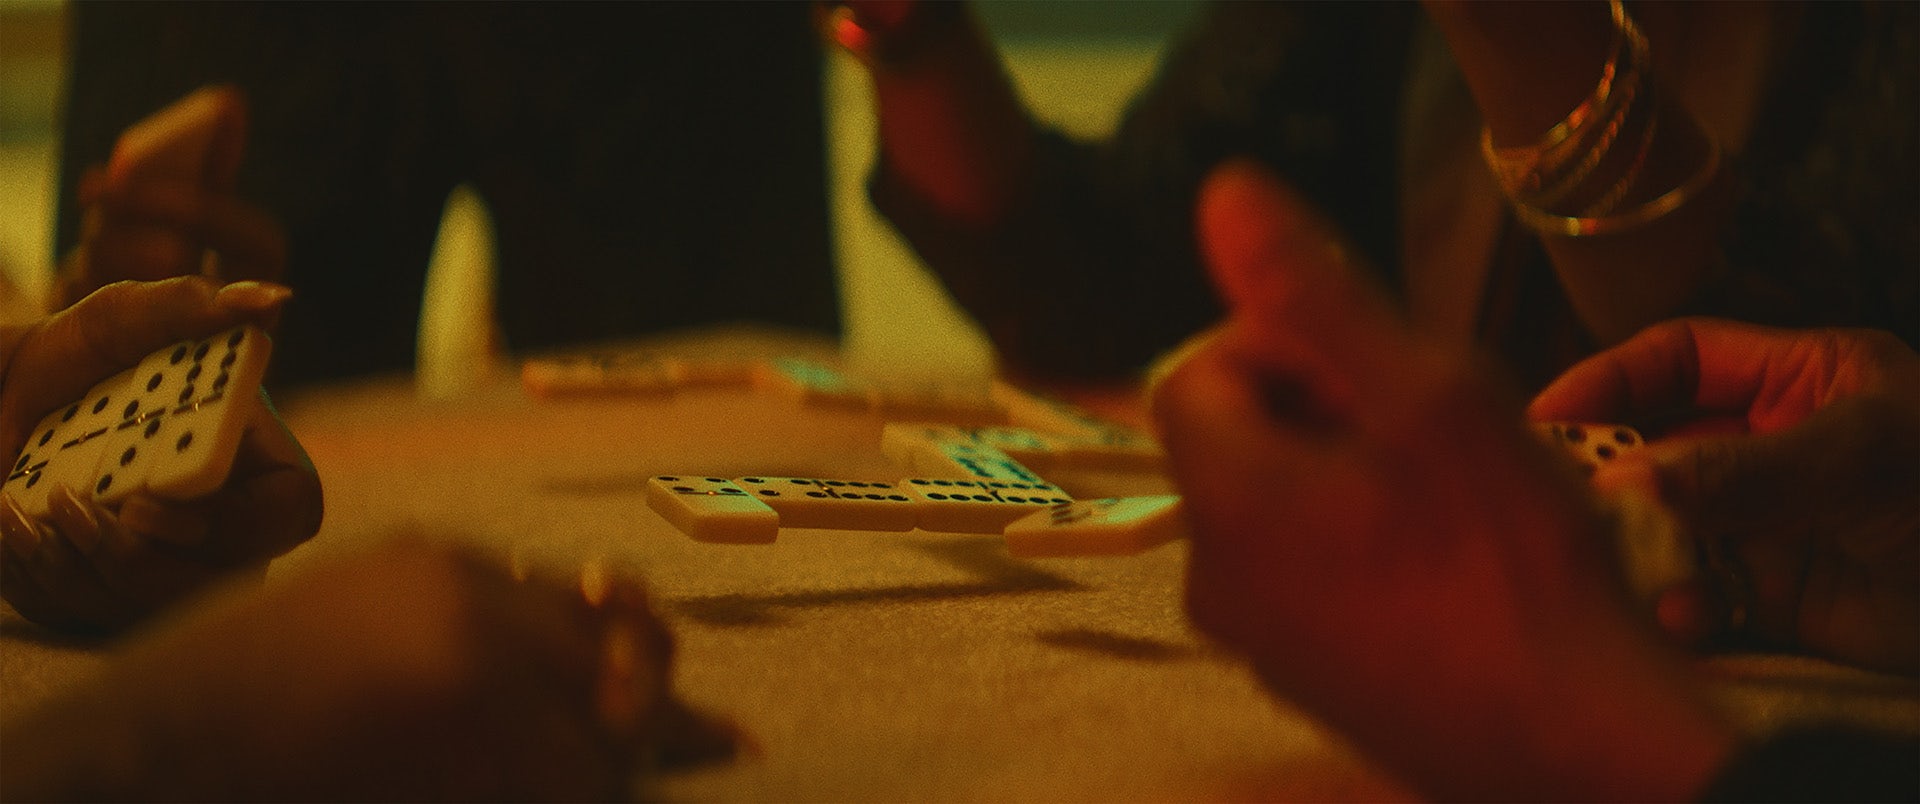 Close-up of people's hands as they play dominoes which are levitating above the tabletop